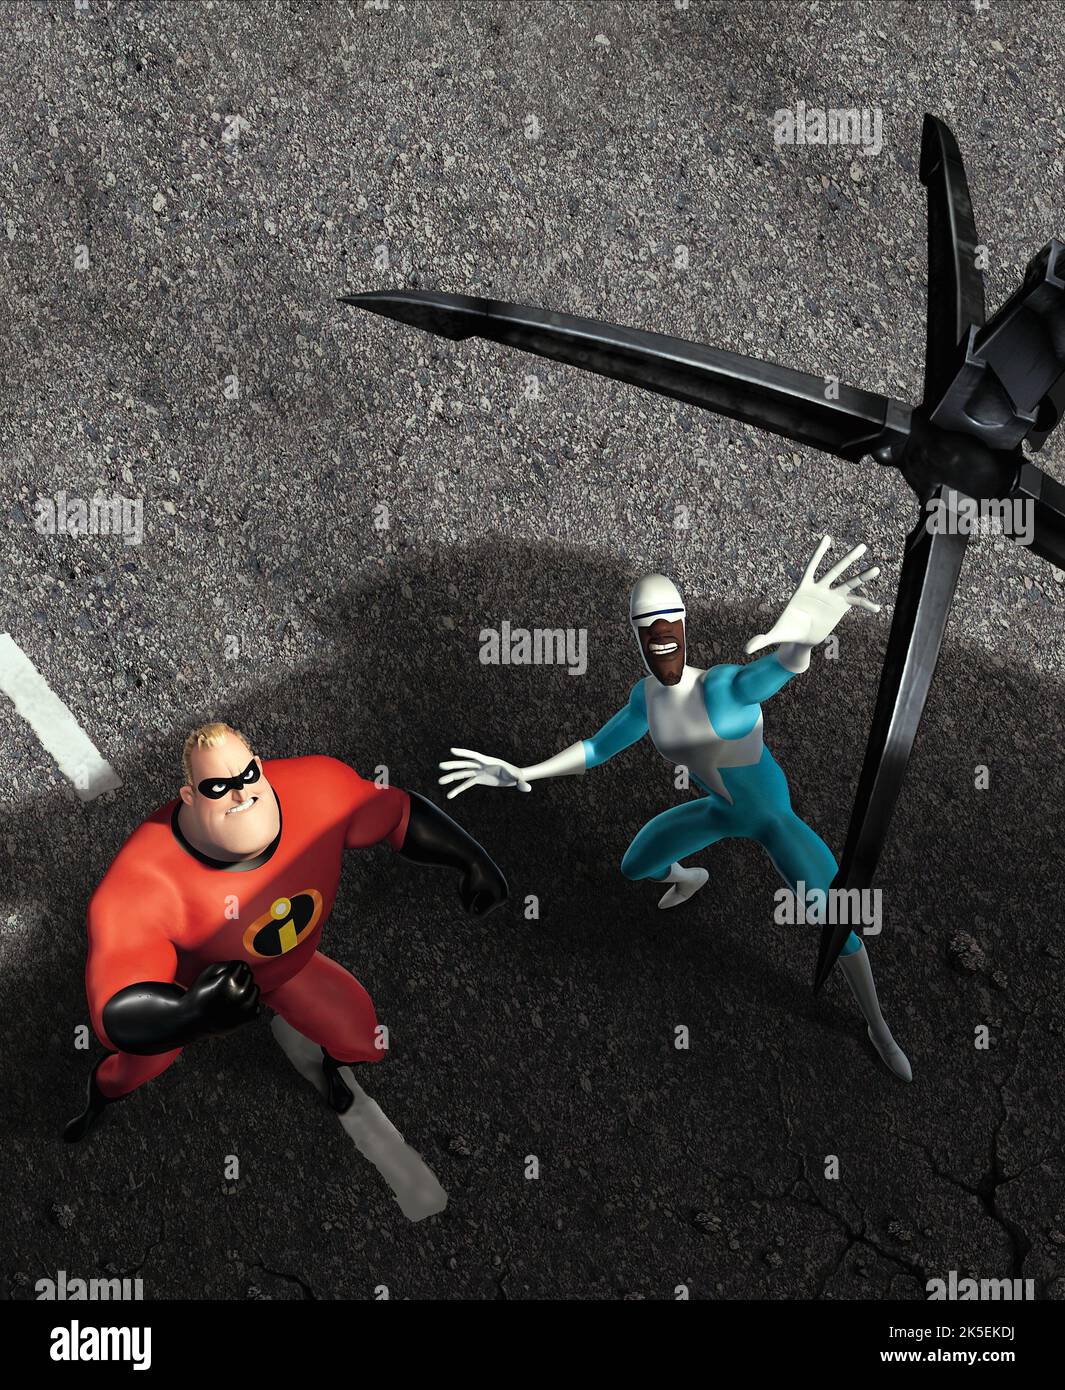 MR. INCREDIBLE, FROZONE, THE INCREDIBLES, 2004 Stock Photo